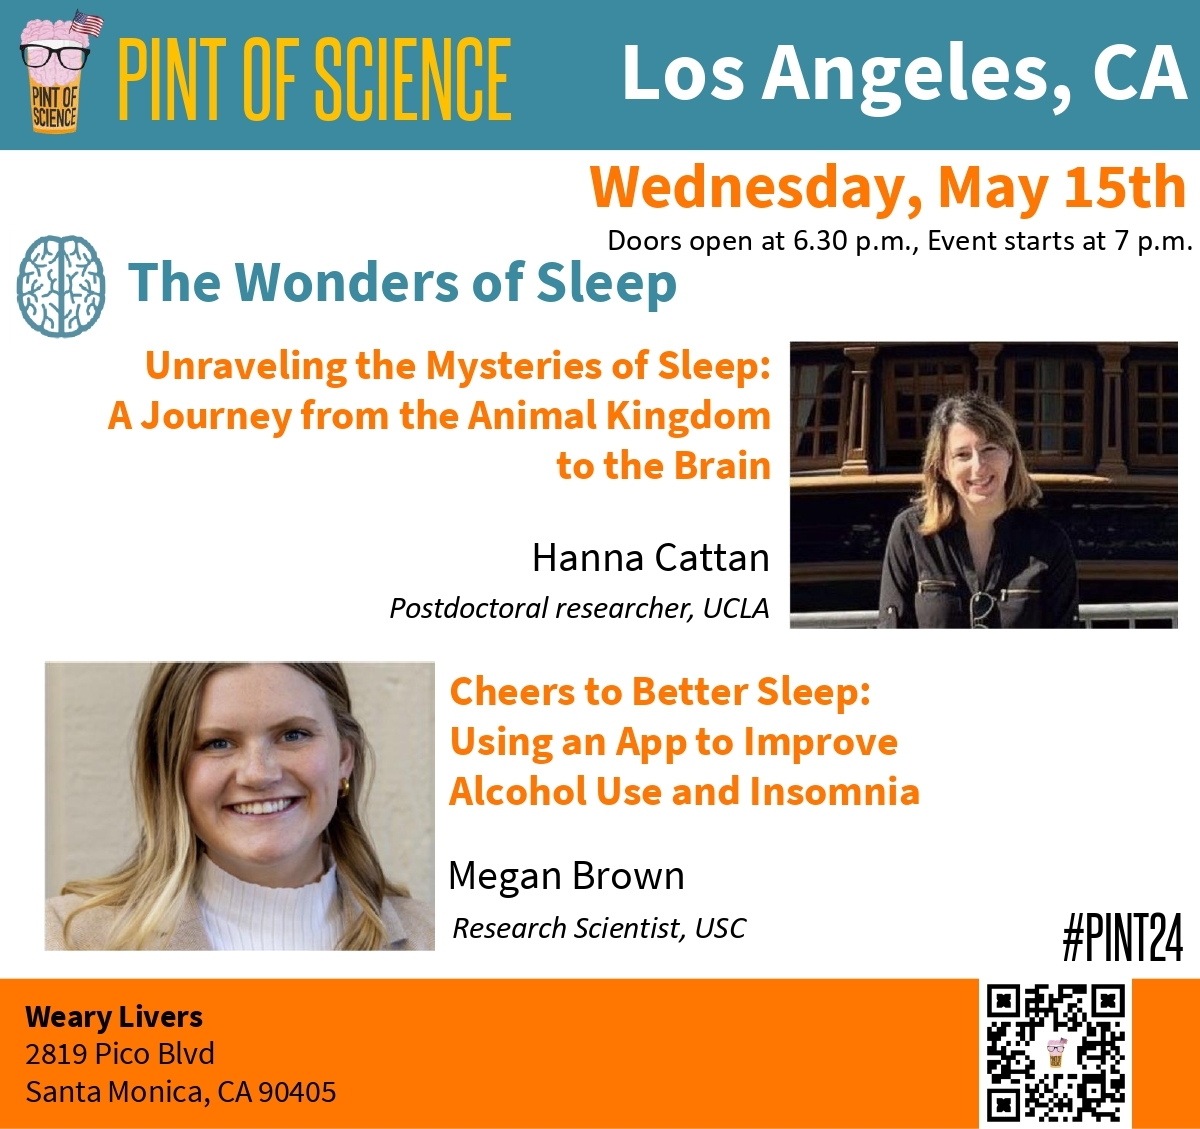 🎯Los Angeles: here is bar #2!
Here's the list of🗣️talks and speakers for #pint24 in LA😎
Choose wisely between the 2 bars and different topics for May 13-14-15🤔
📍Weary Livers 
Book your tickets🎟️here👉pintofscience.us/events/la